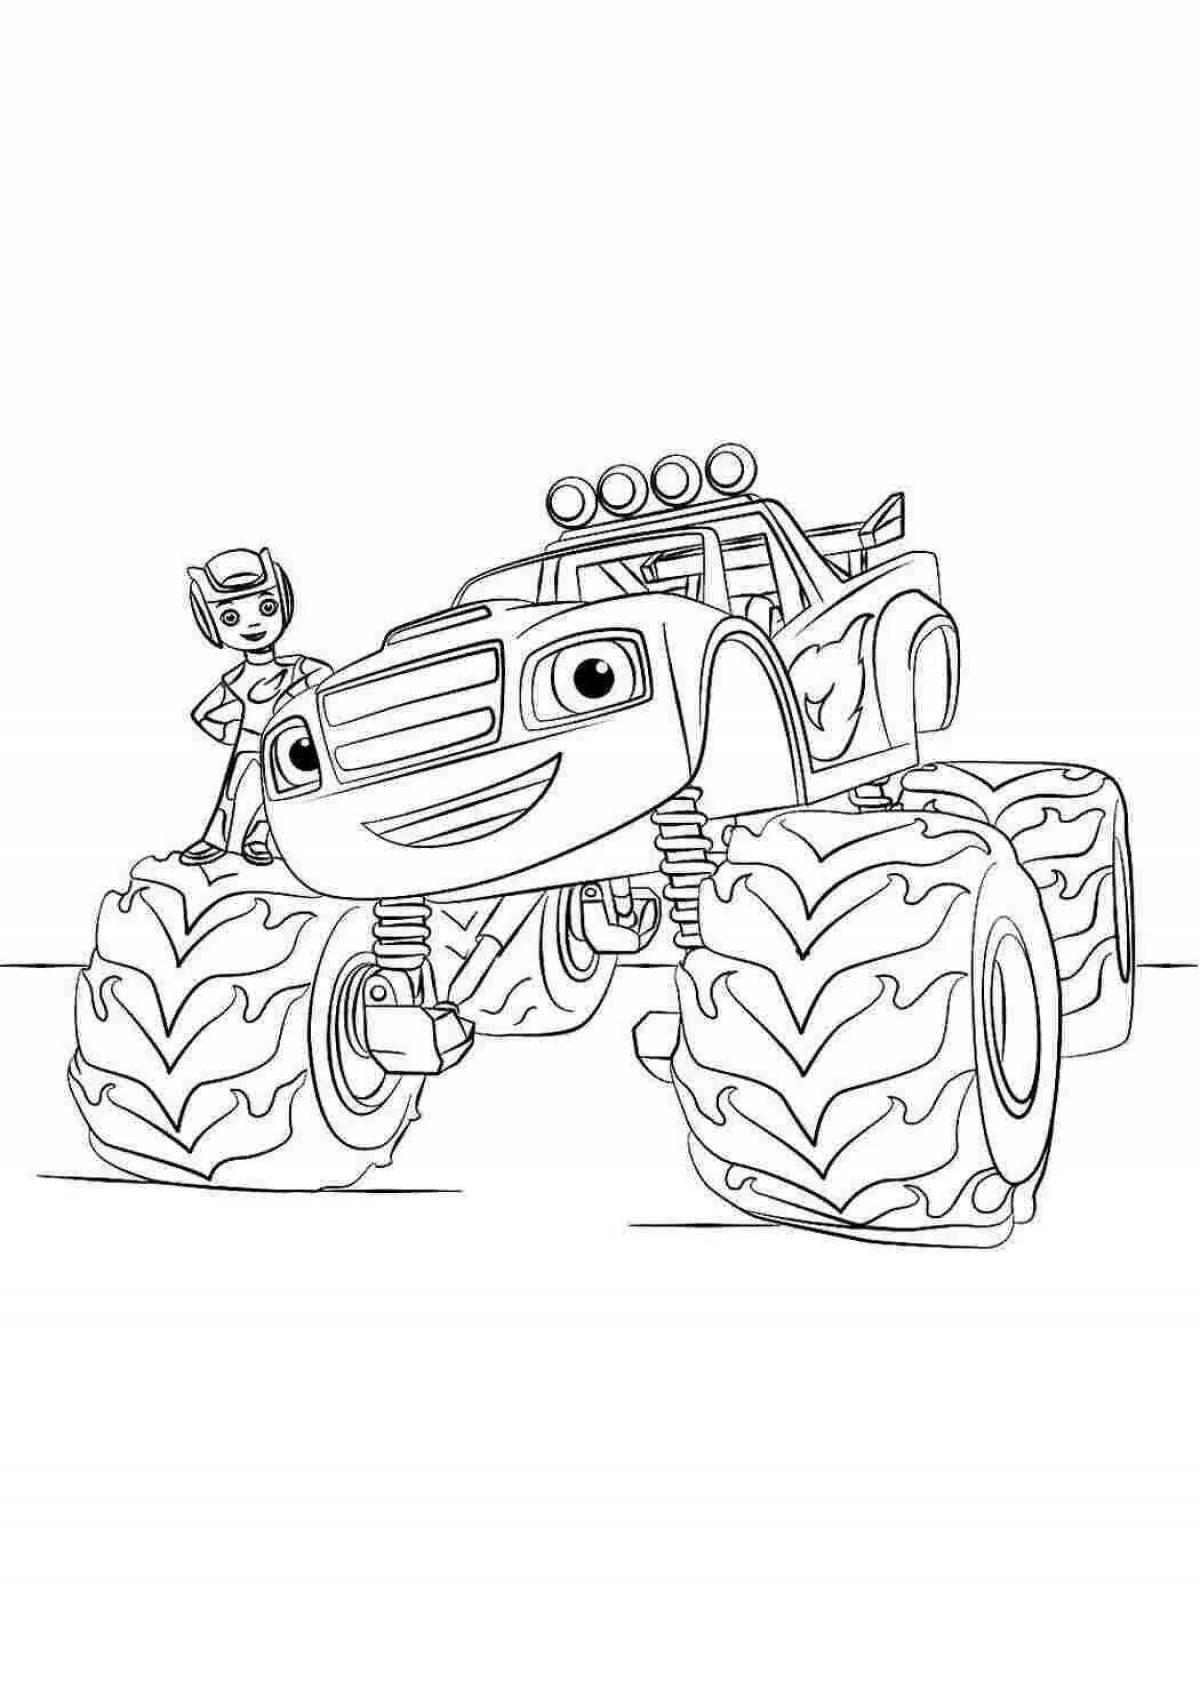 Amazing flash drives and wonder cars coloring pages for kids